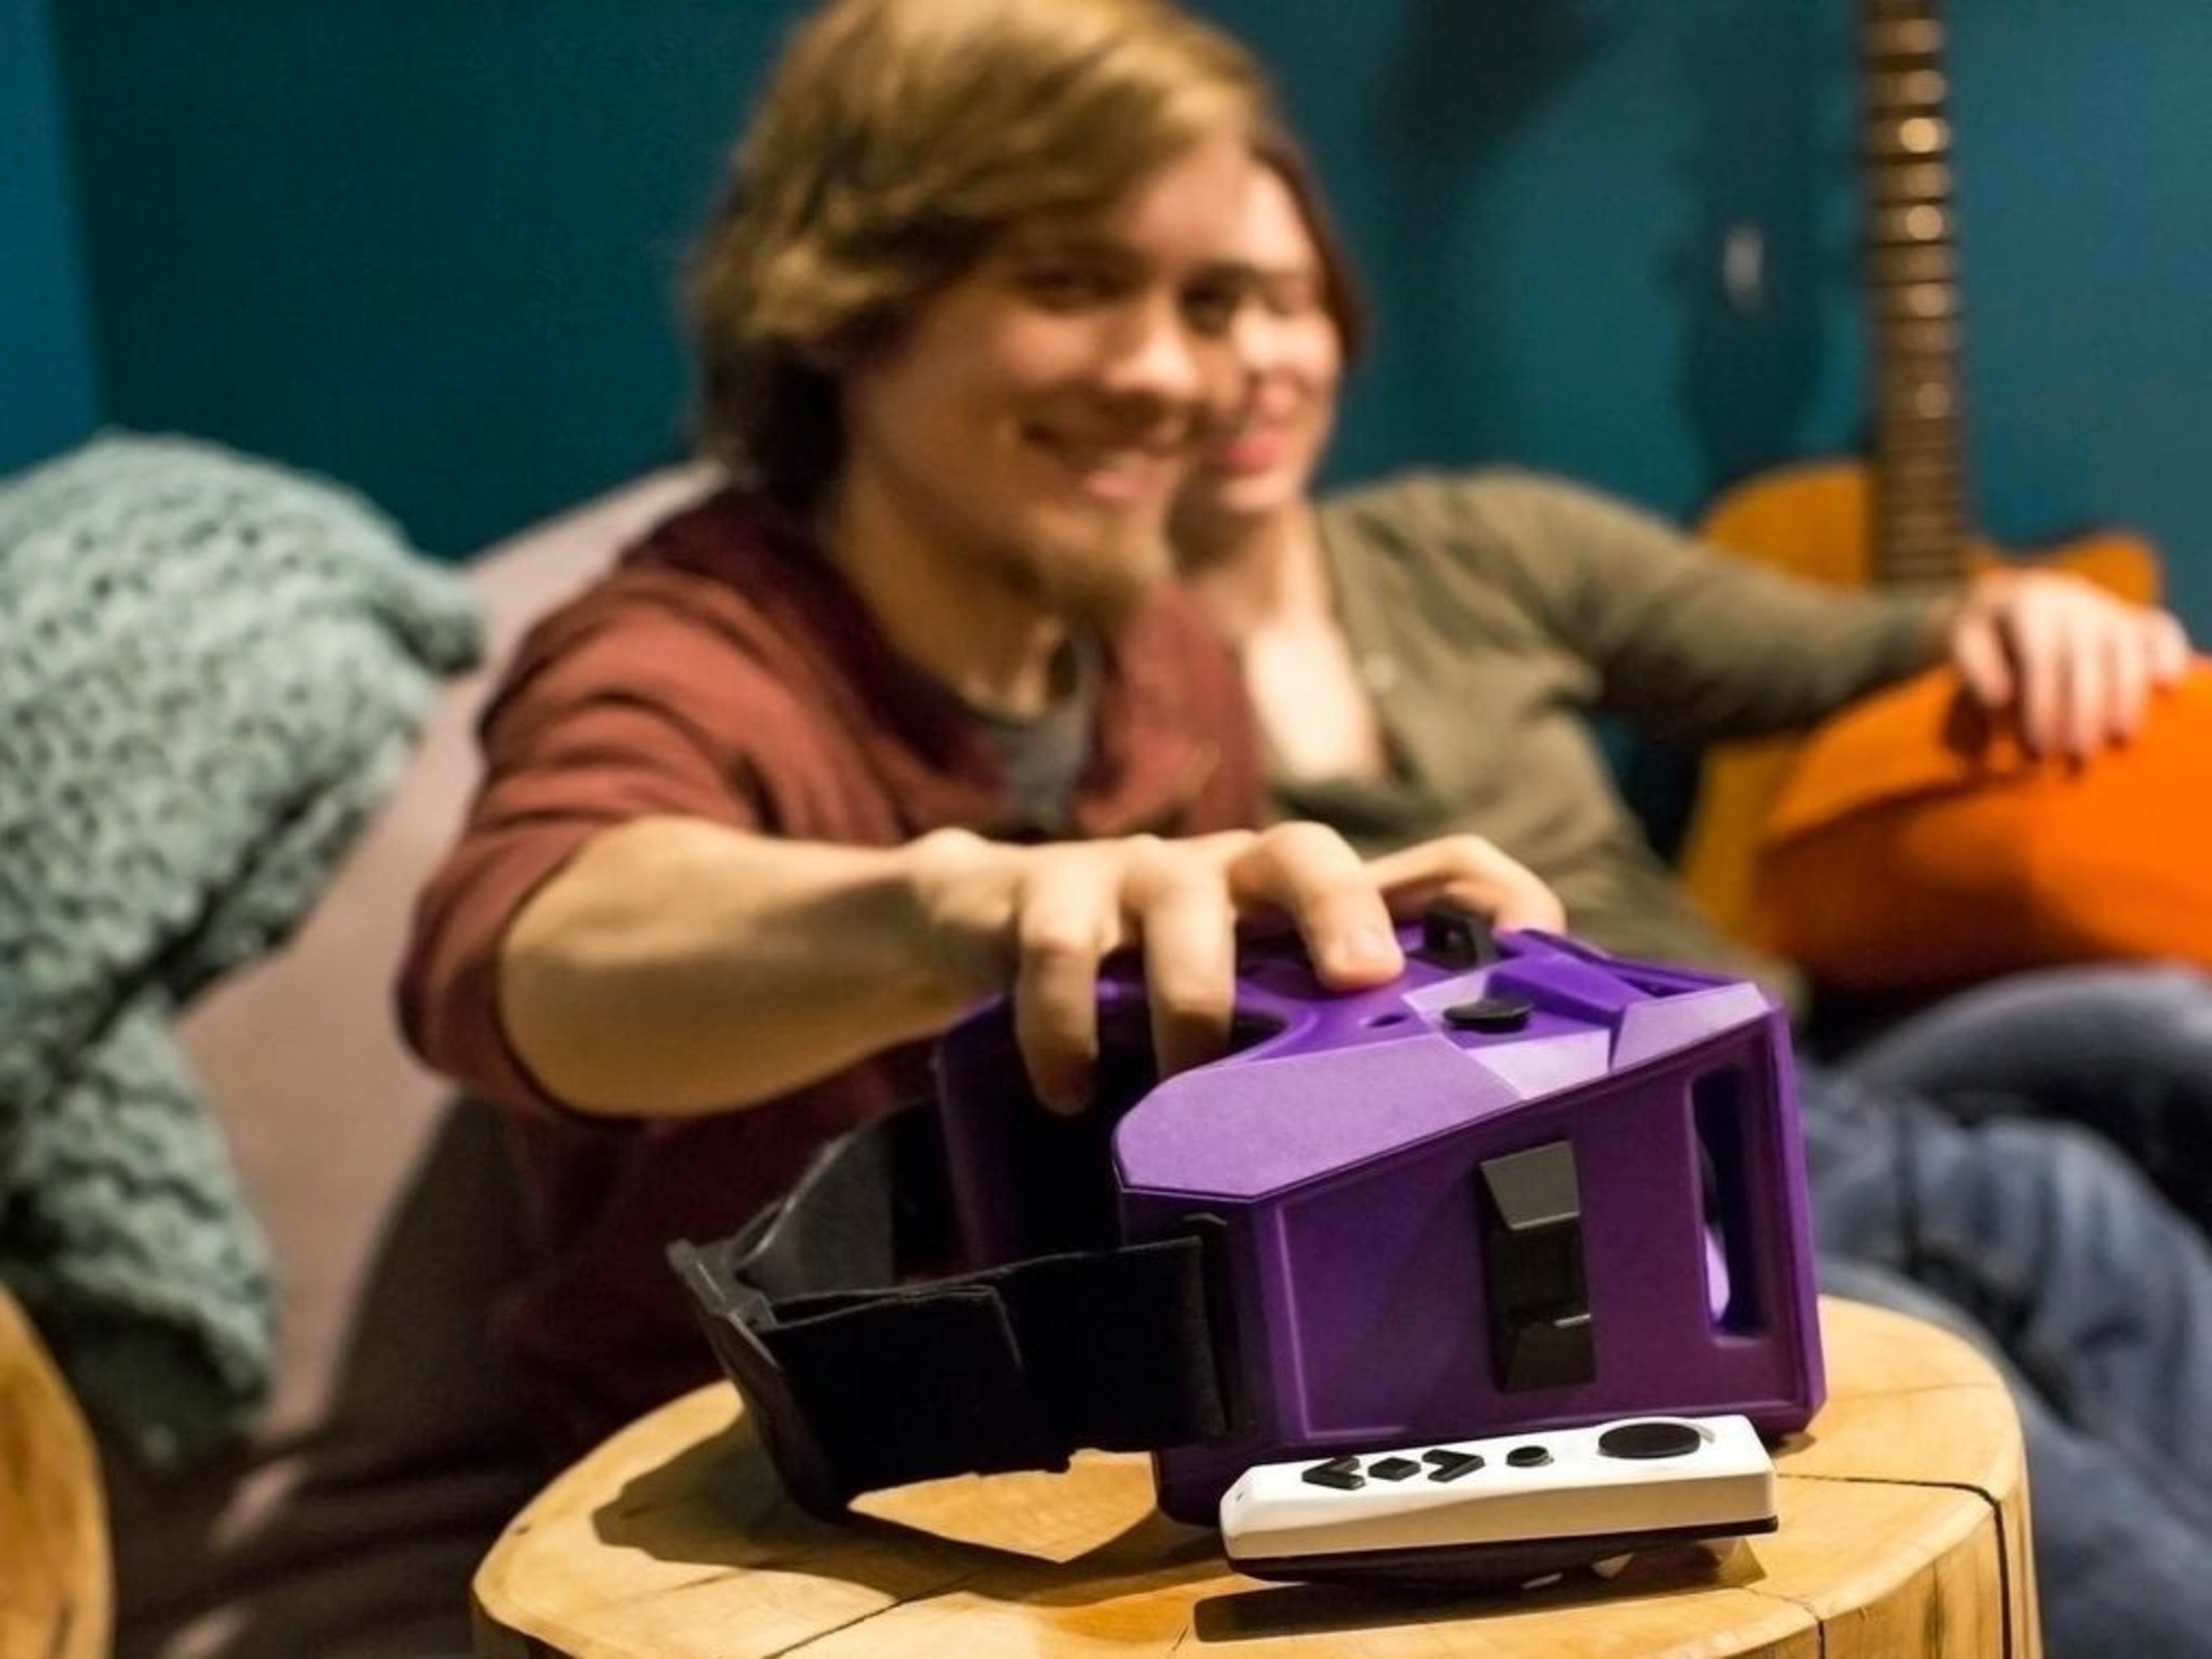 MergeVR virtual reality goggles and motion controller launching fall 2015. (instagram.com/Merge.VR)